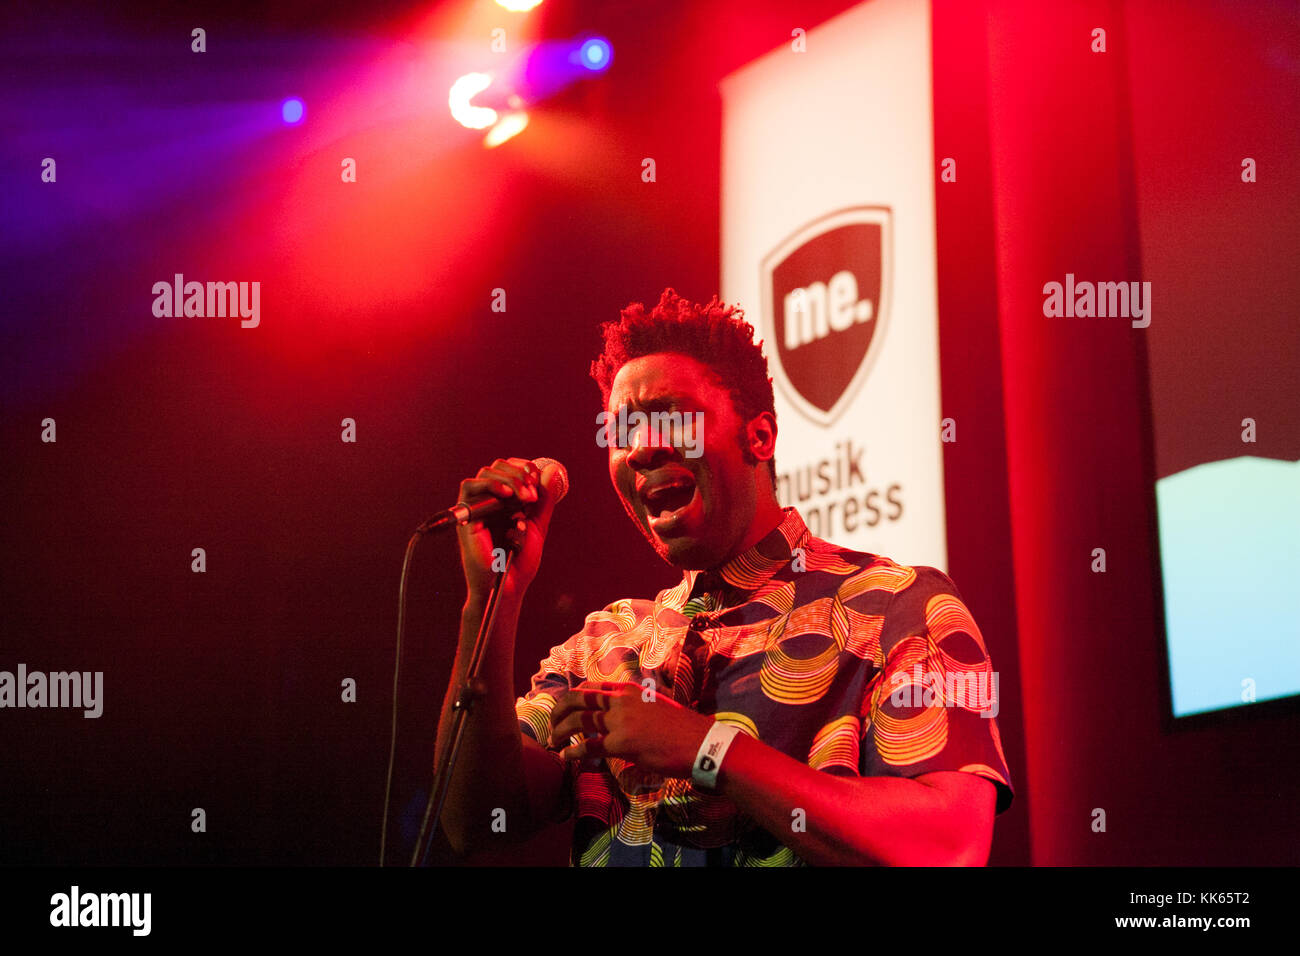 The British musician, singer and songwriter Kelechukwu Rowland Okereke is better known by his stage name Kele and is here pictured live on stage at E-Werk in Berlin. Kele Okereke is also known as the guitarist and singer of the indie rock band Bloc Party. Germany, 15/10 2014. Stock Photo